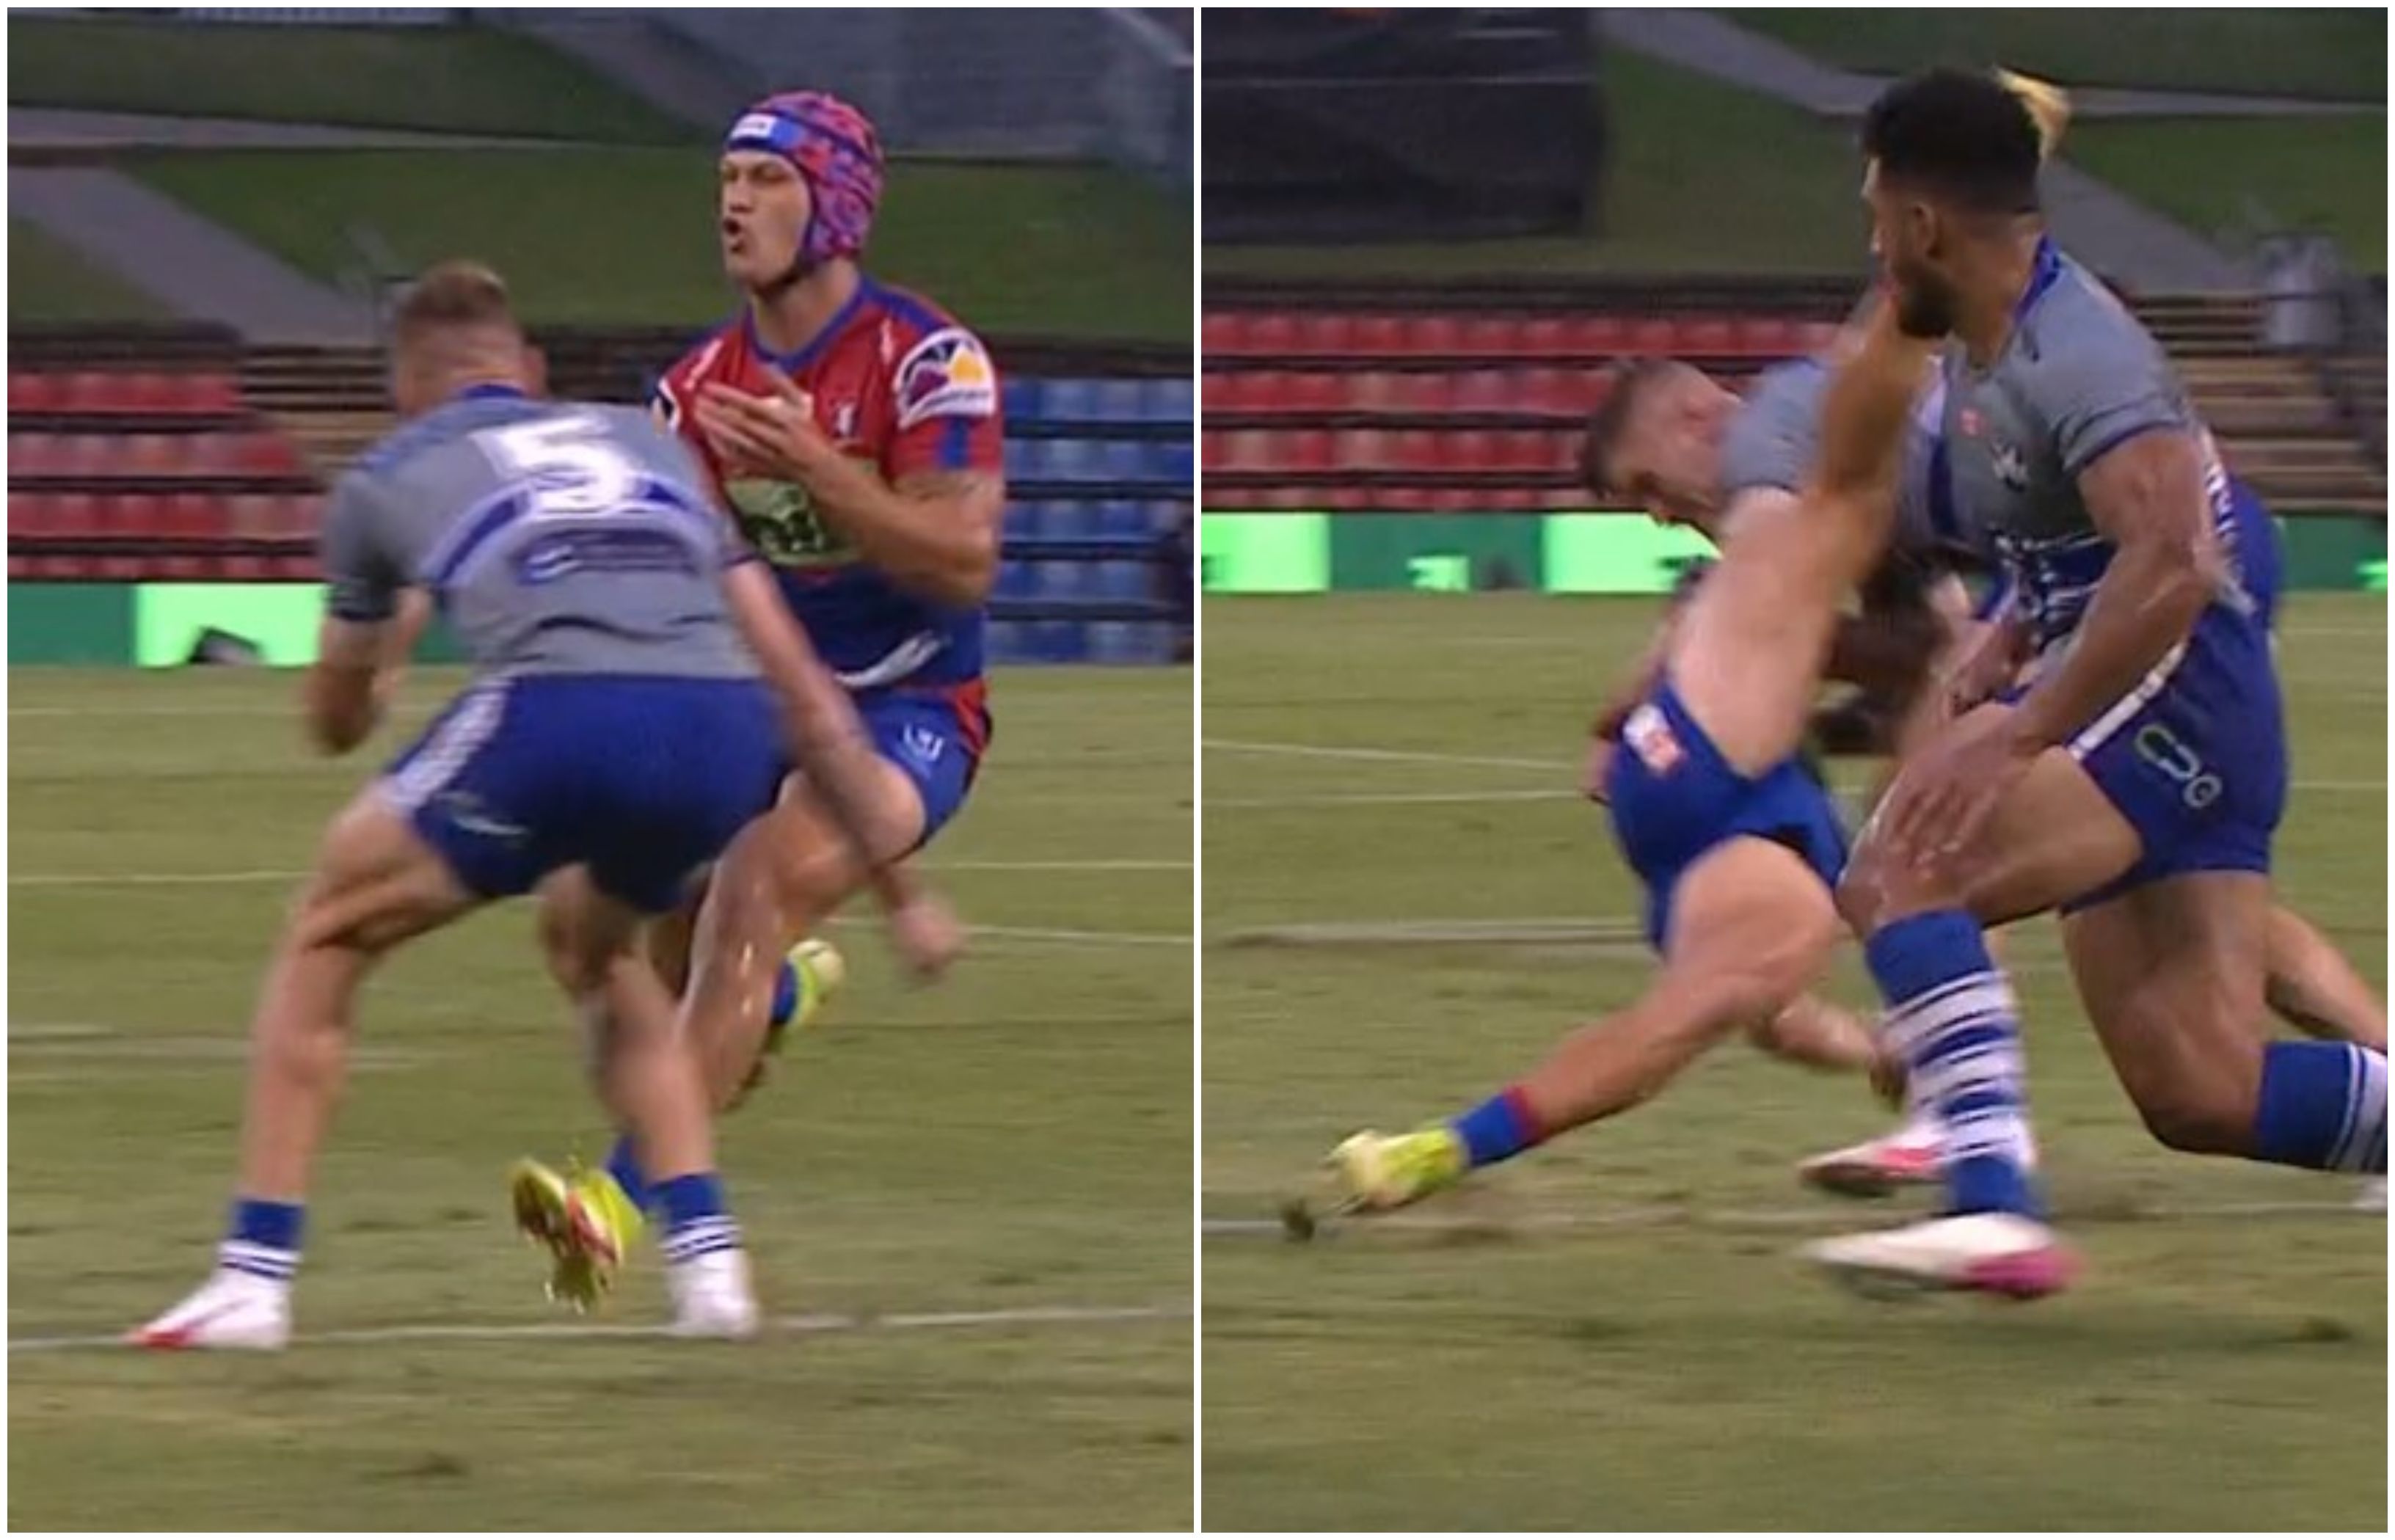 Kalyn Ponga was ironed out, leading to a Bulldogs try.